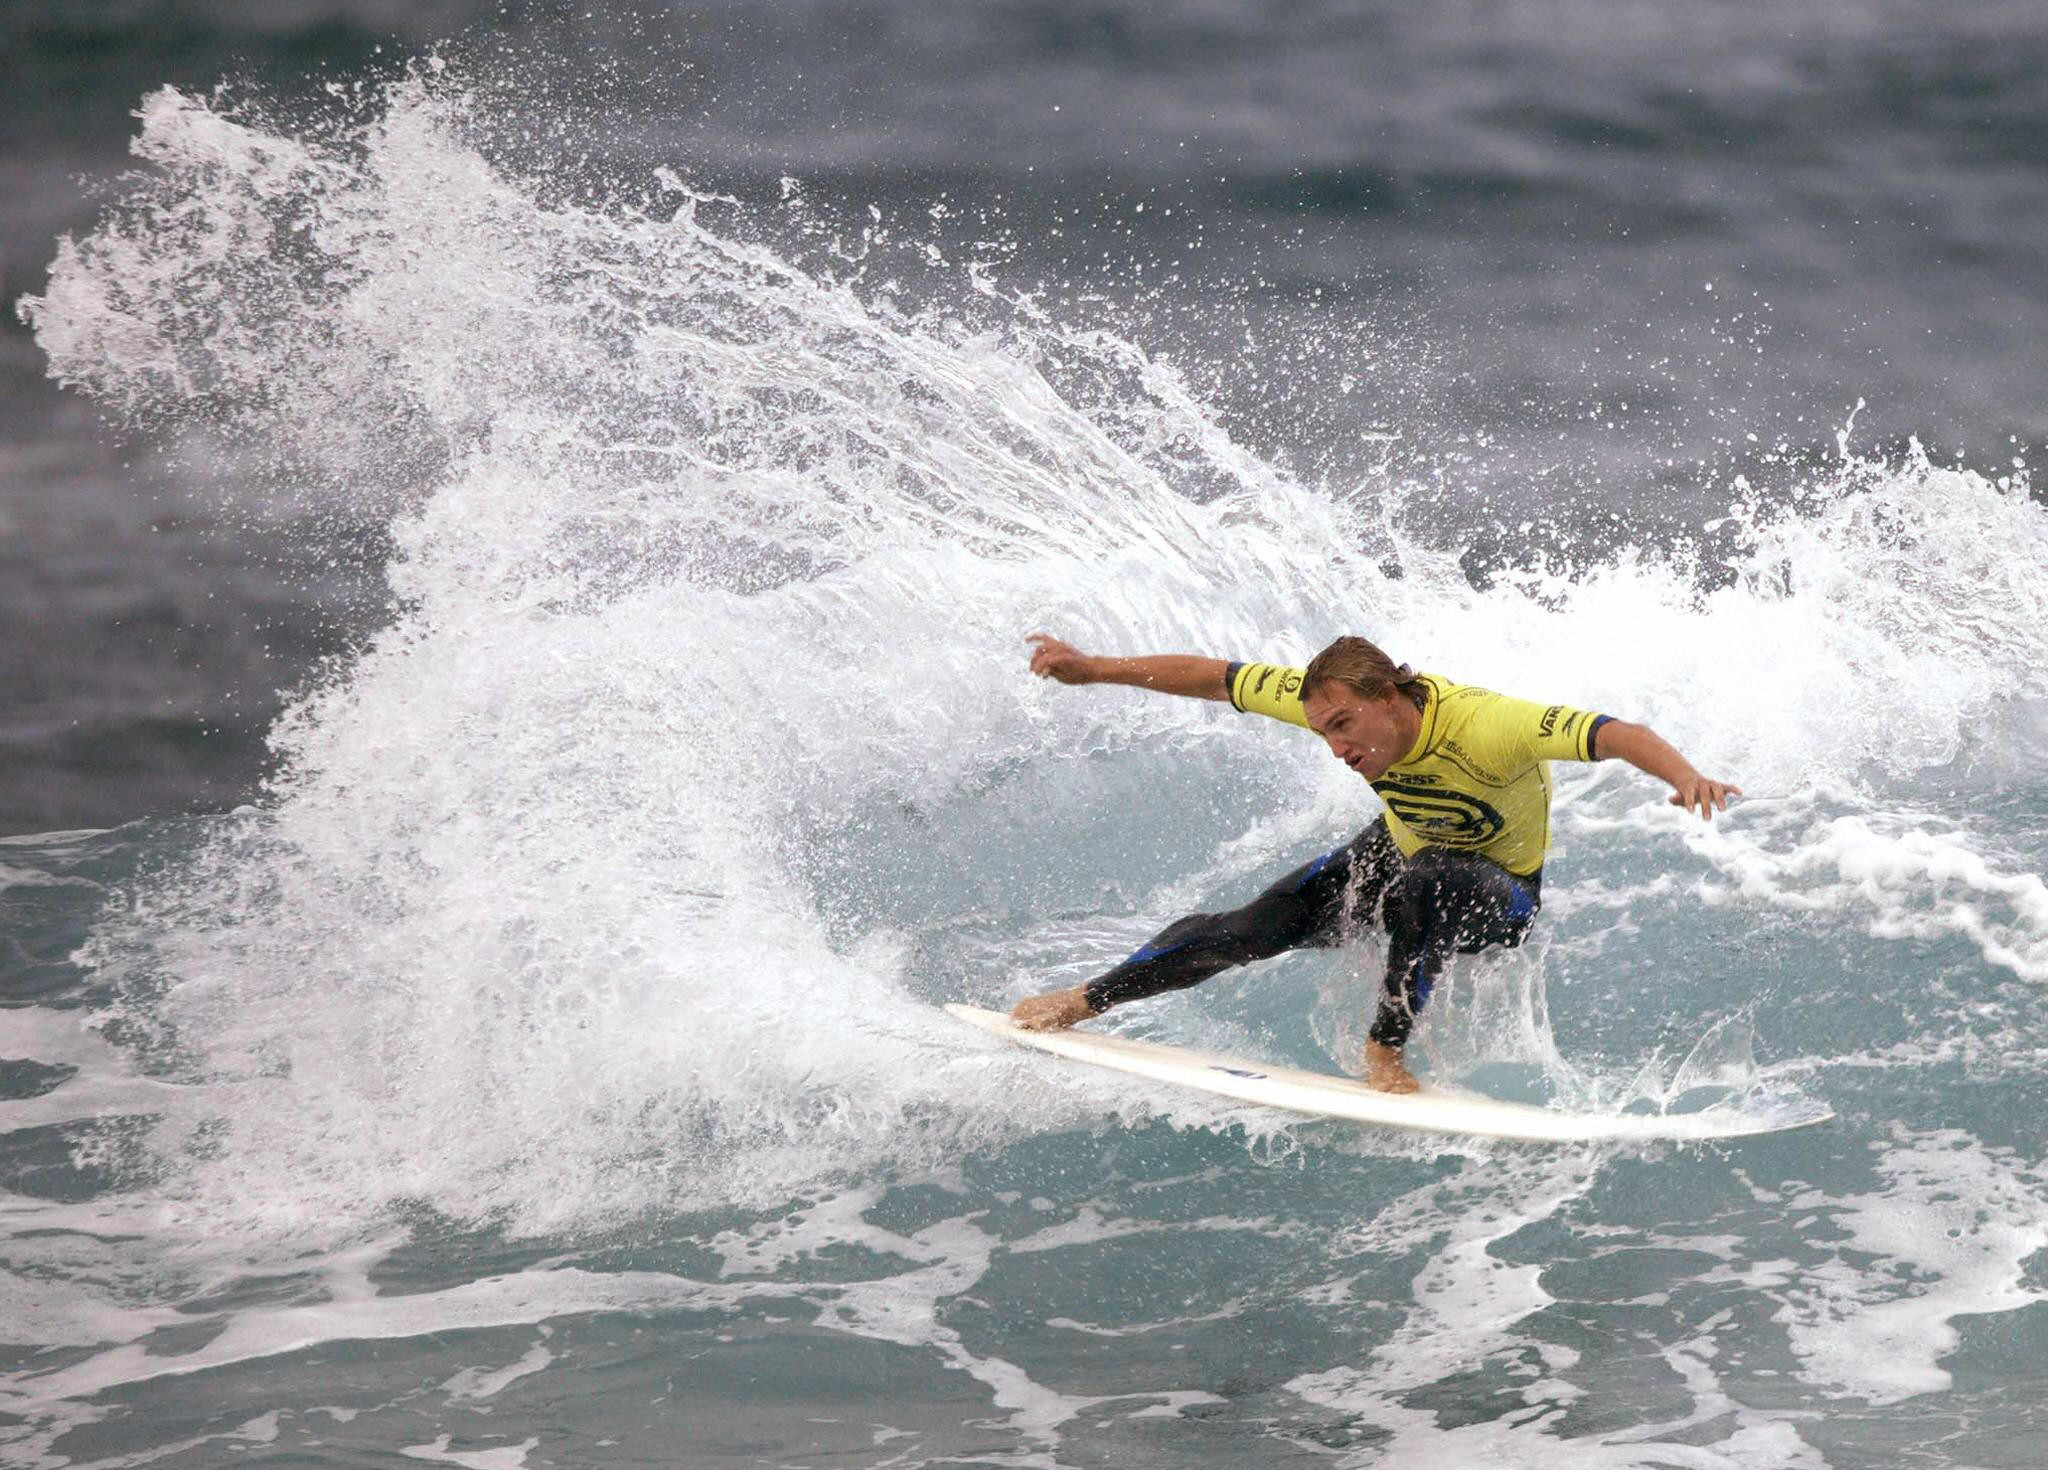 Australian surfer Davidson dies after attack in New South Wales